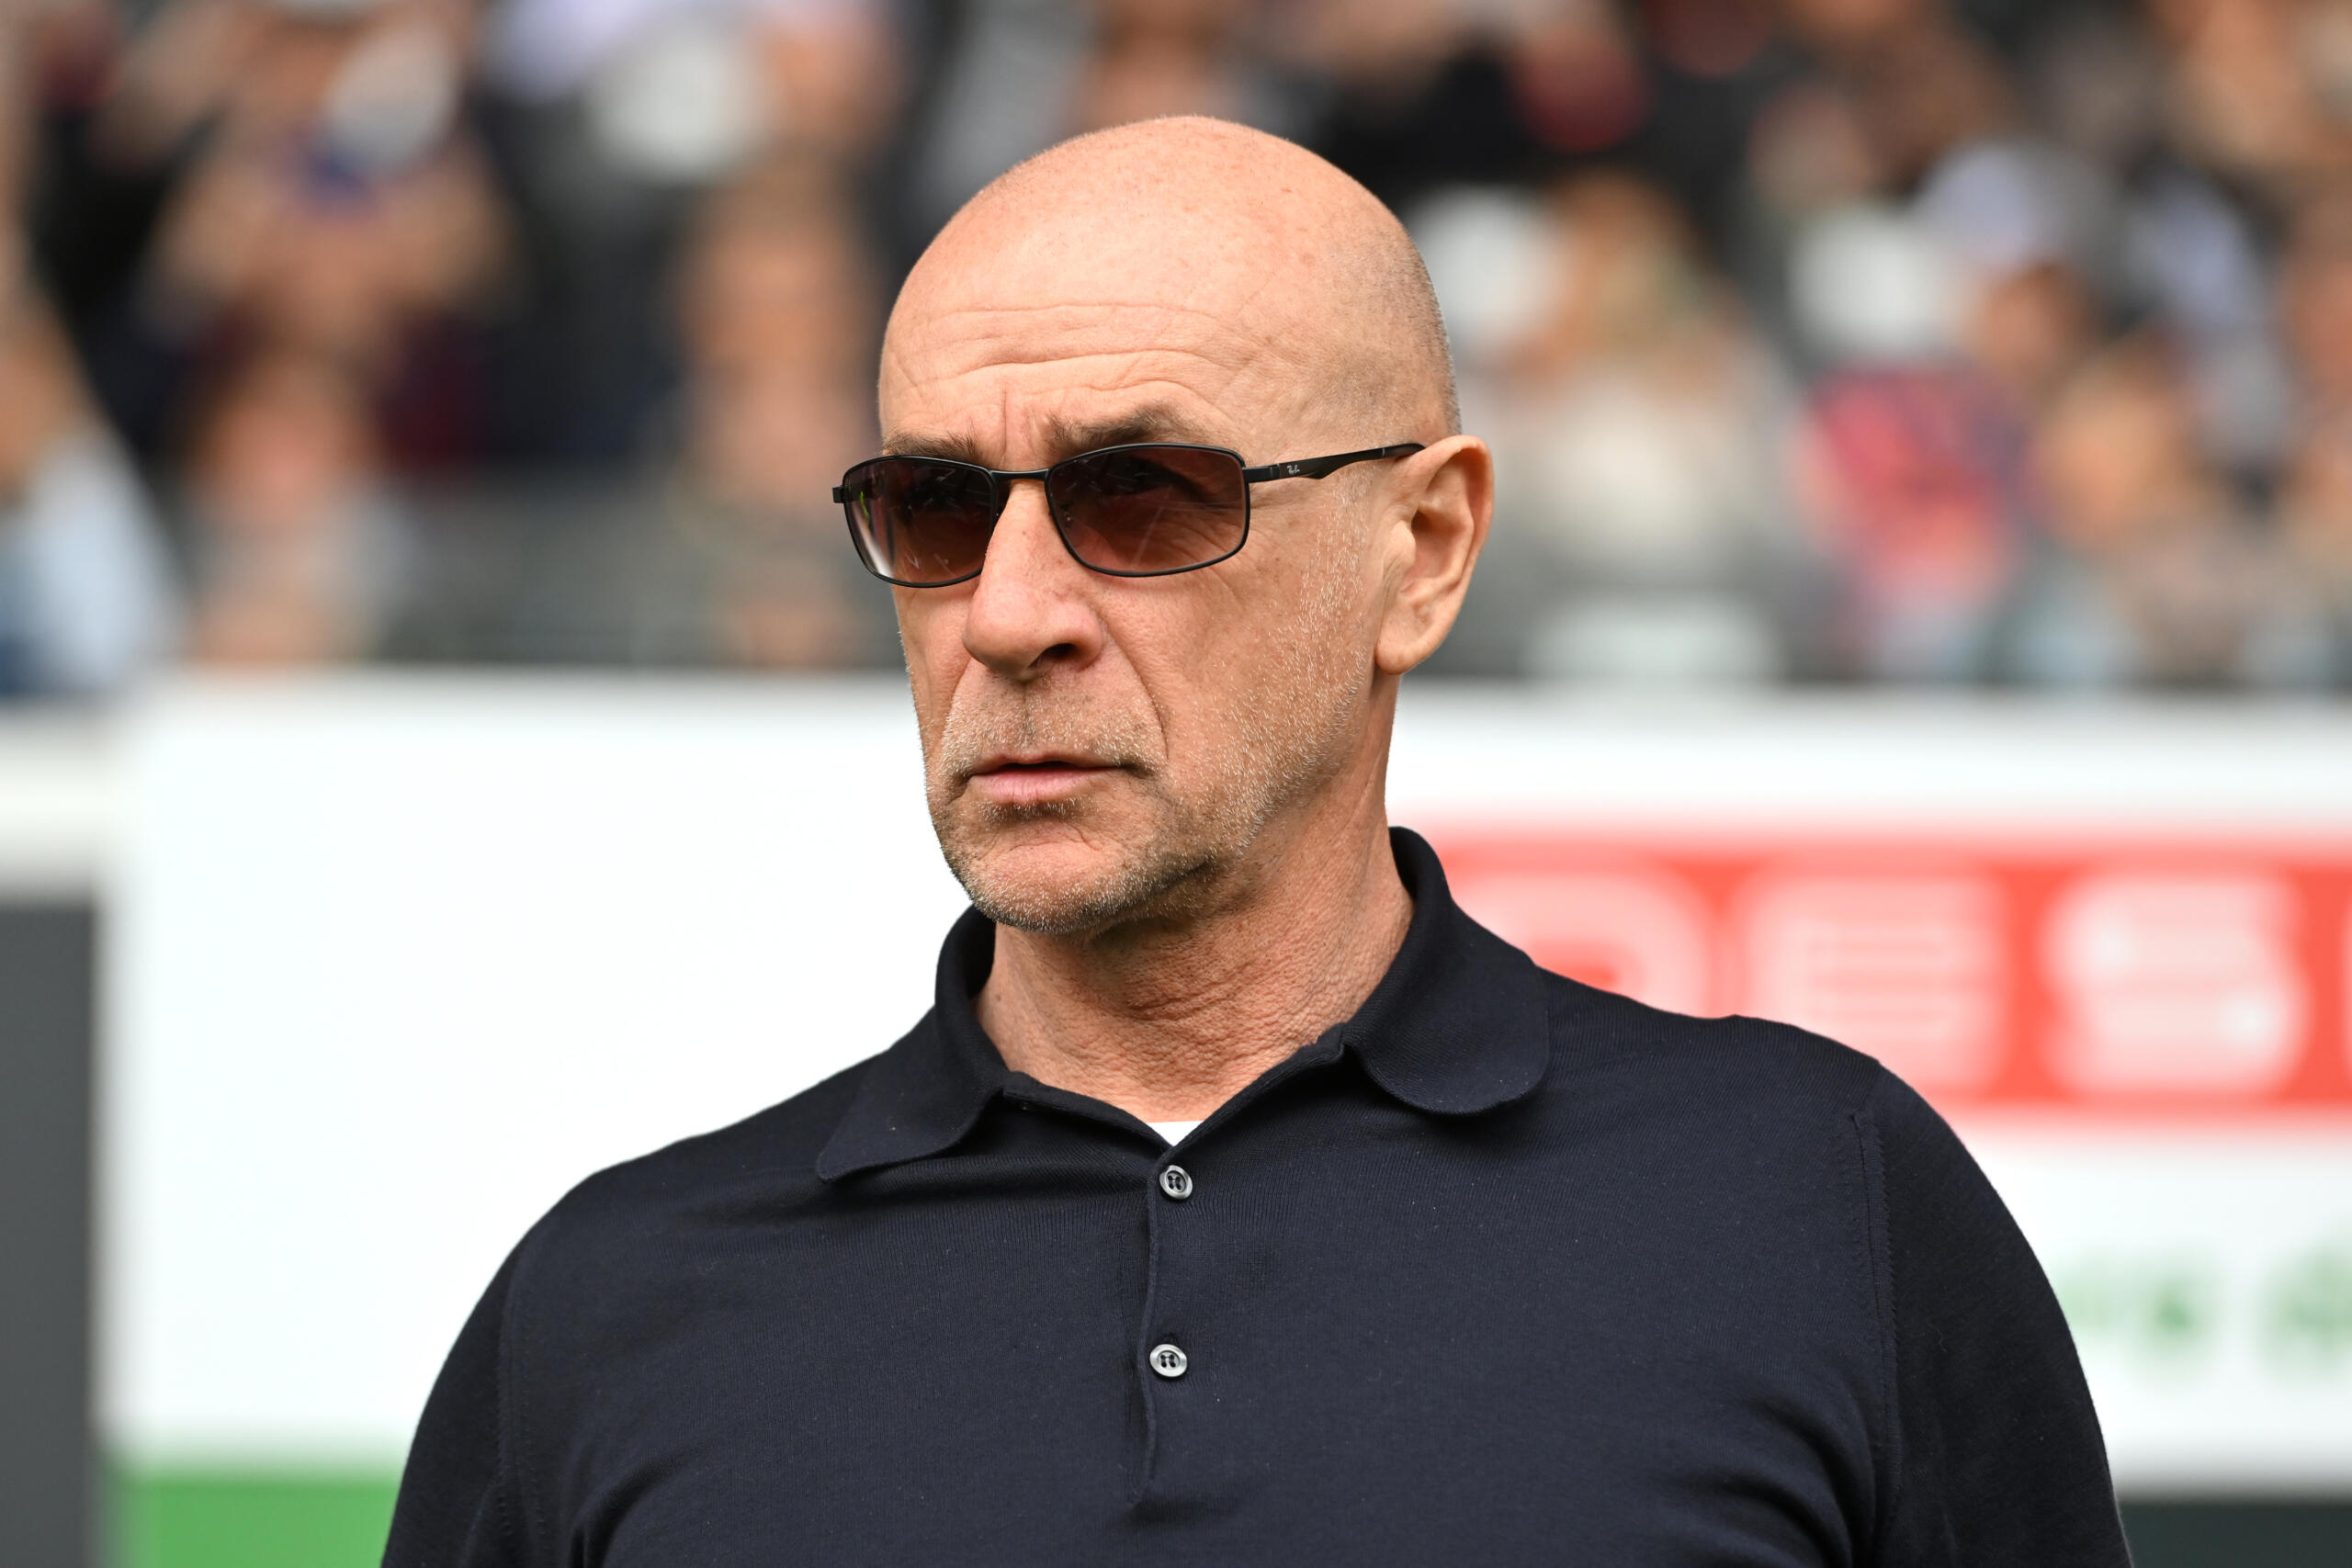 Emiliano Bigica will last only one game on the Sassuolo bench, as the brass opted to hire a more seasoned coach to right the ship, Davide Ballardini.